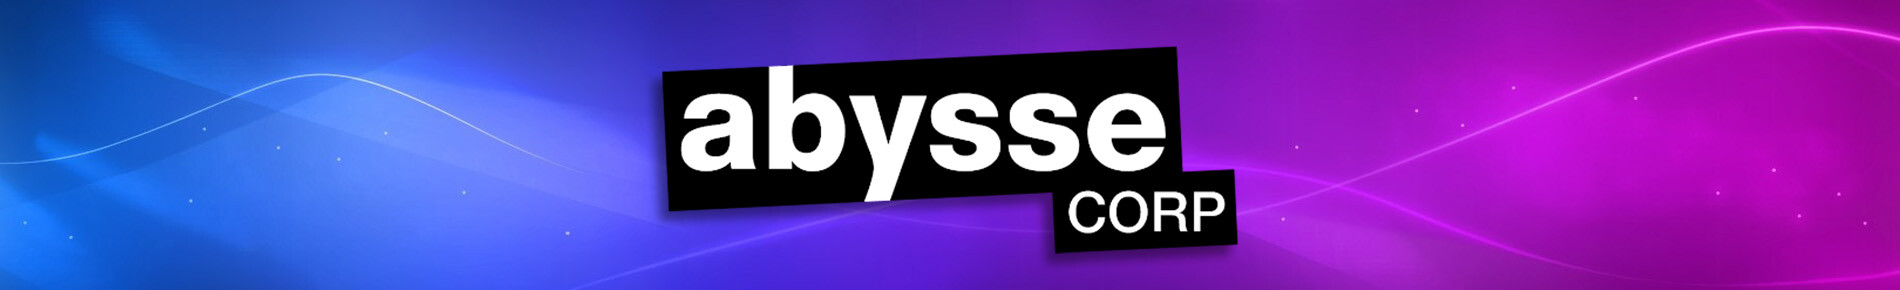 Abysse corp